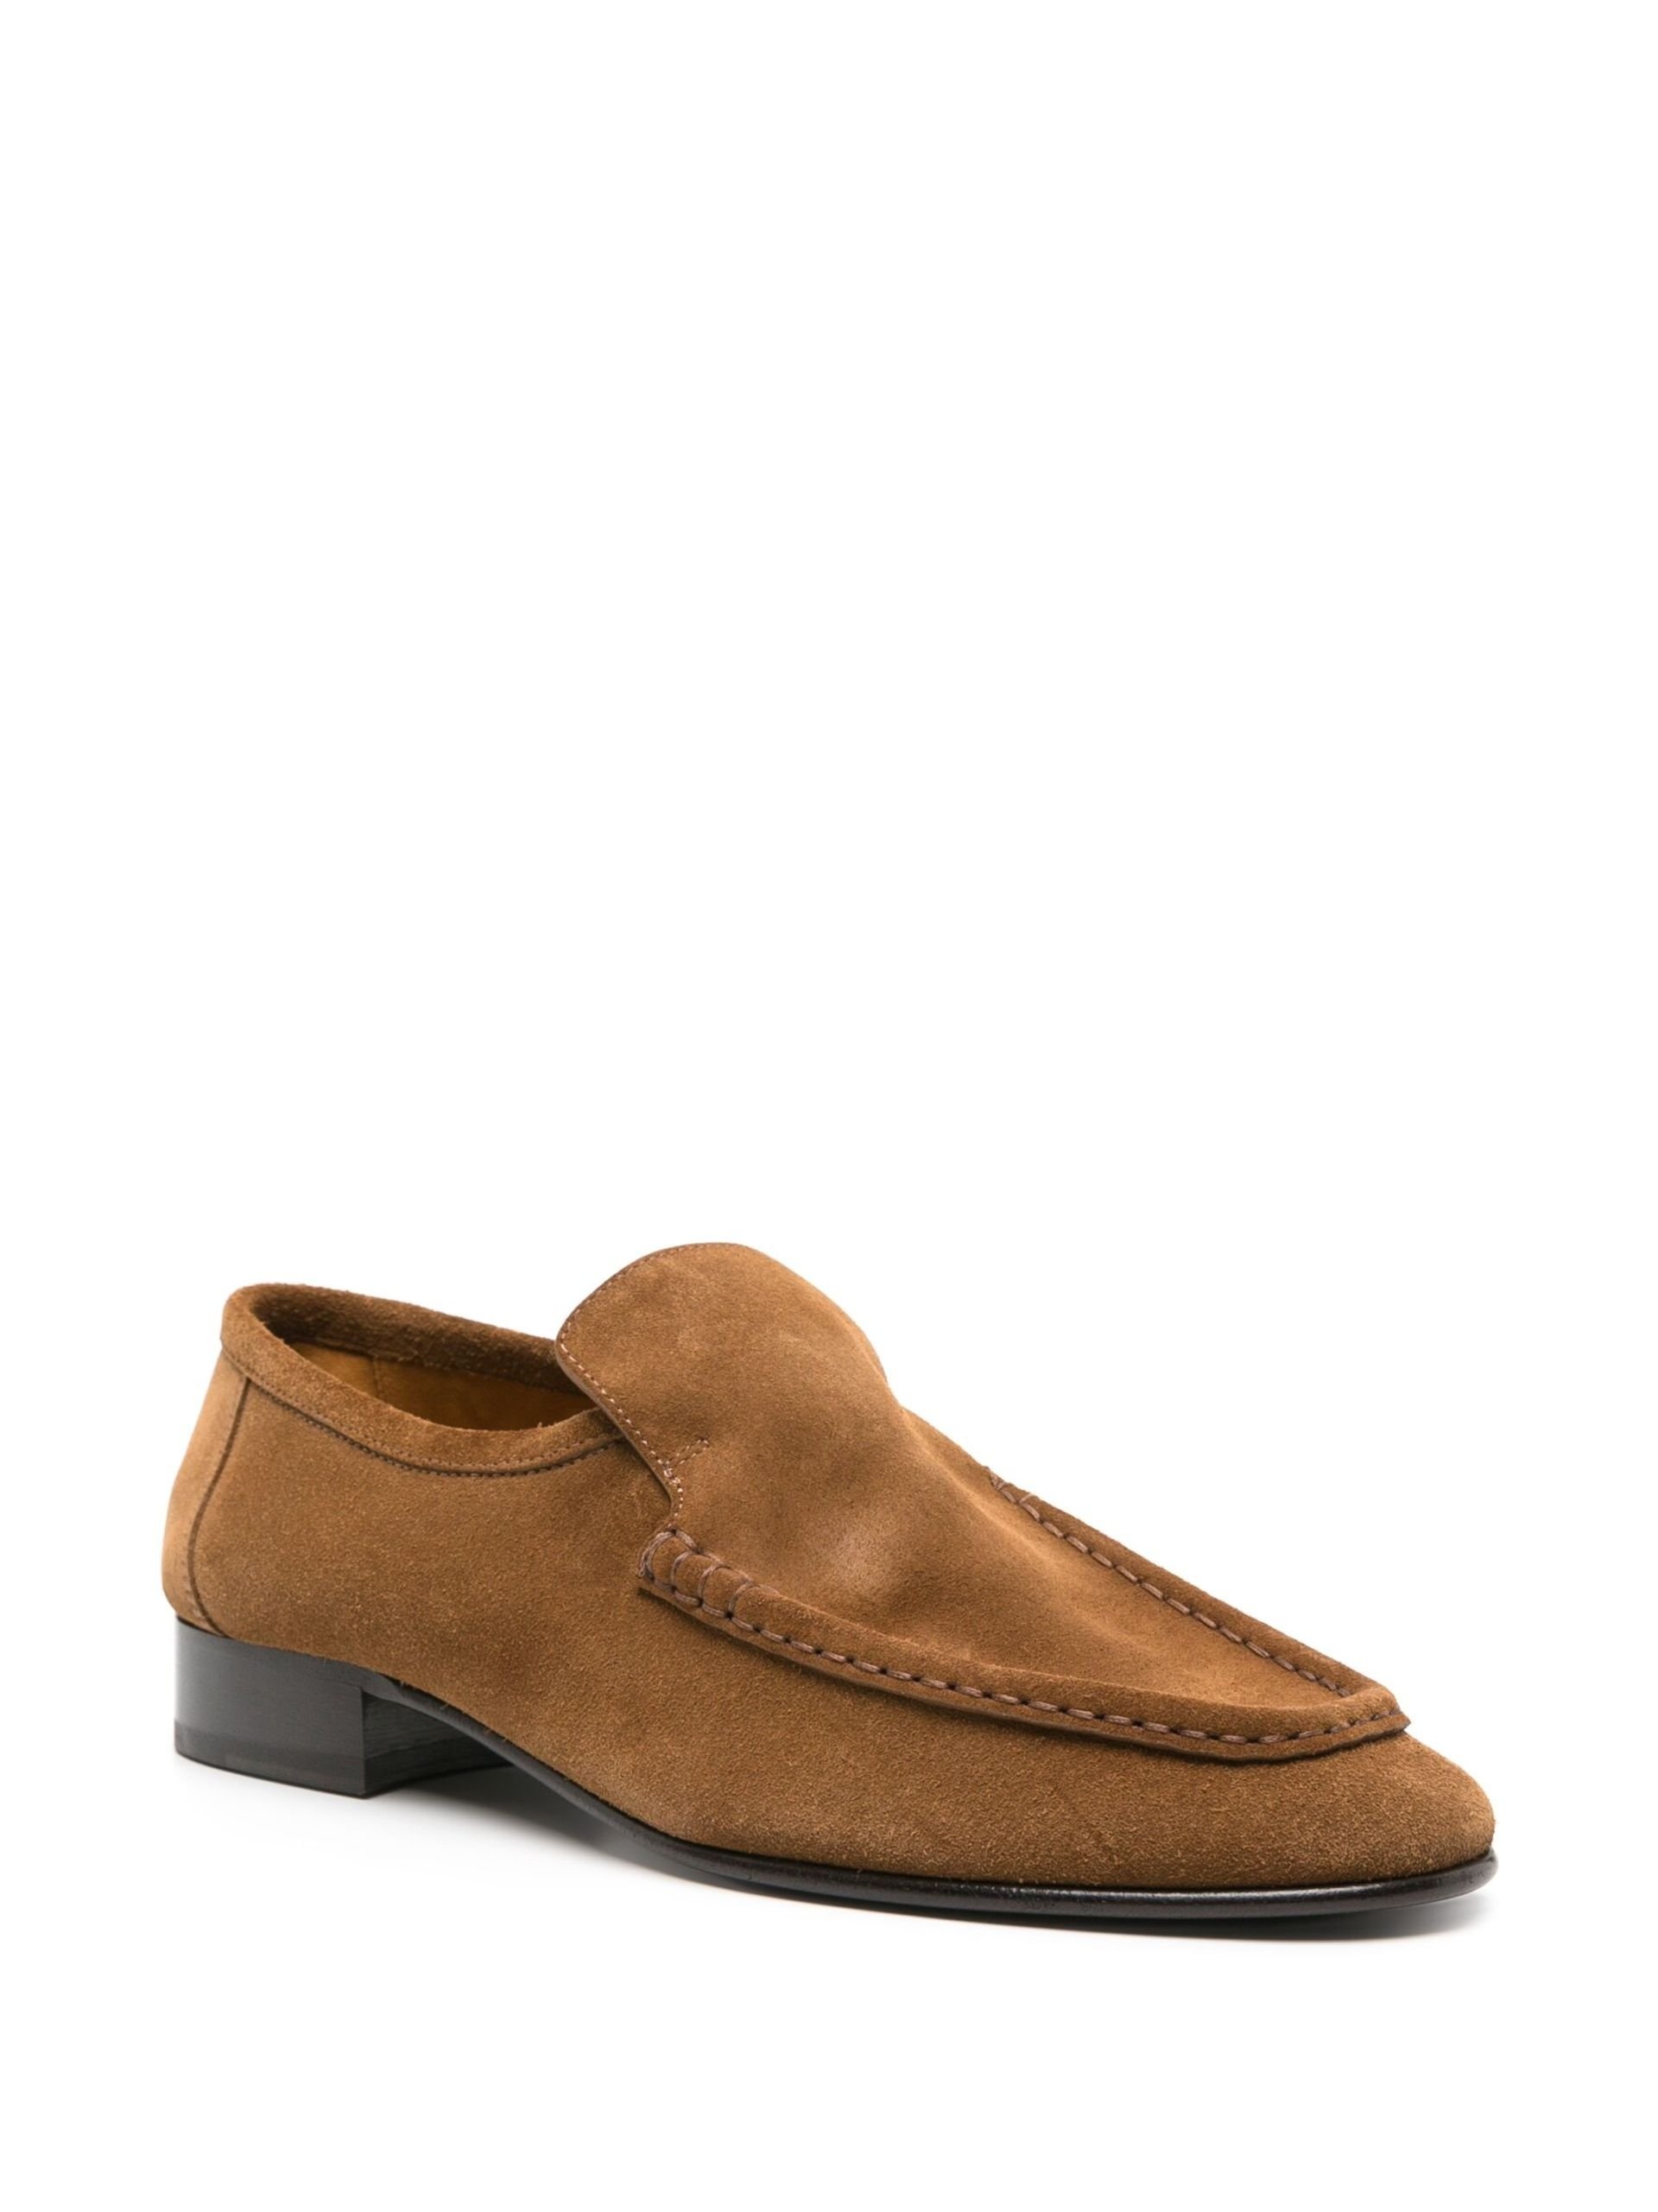 Brown Suede Loafers - 2